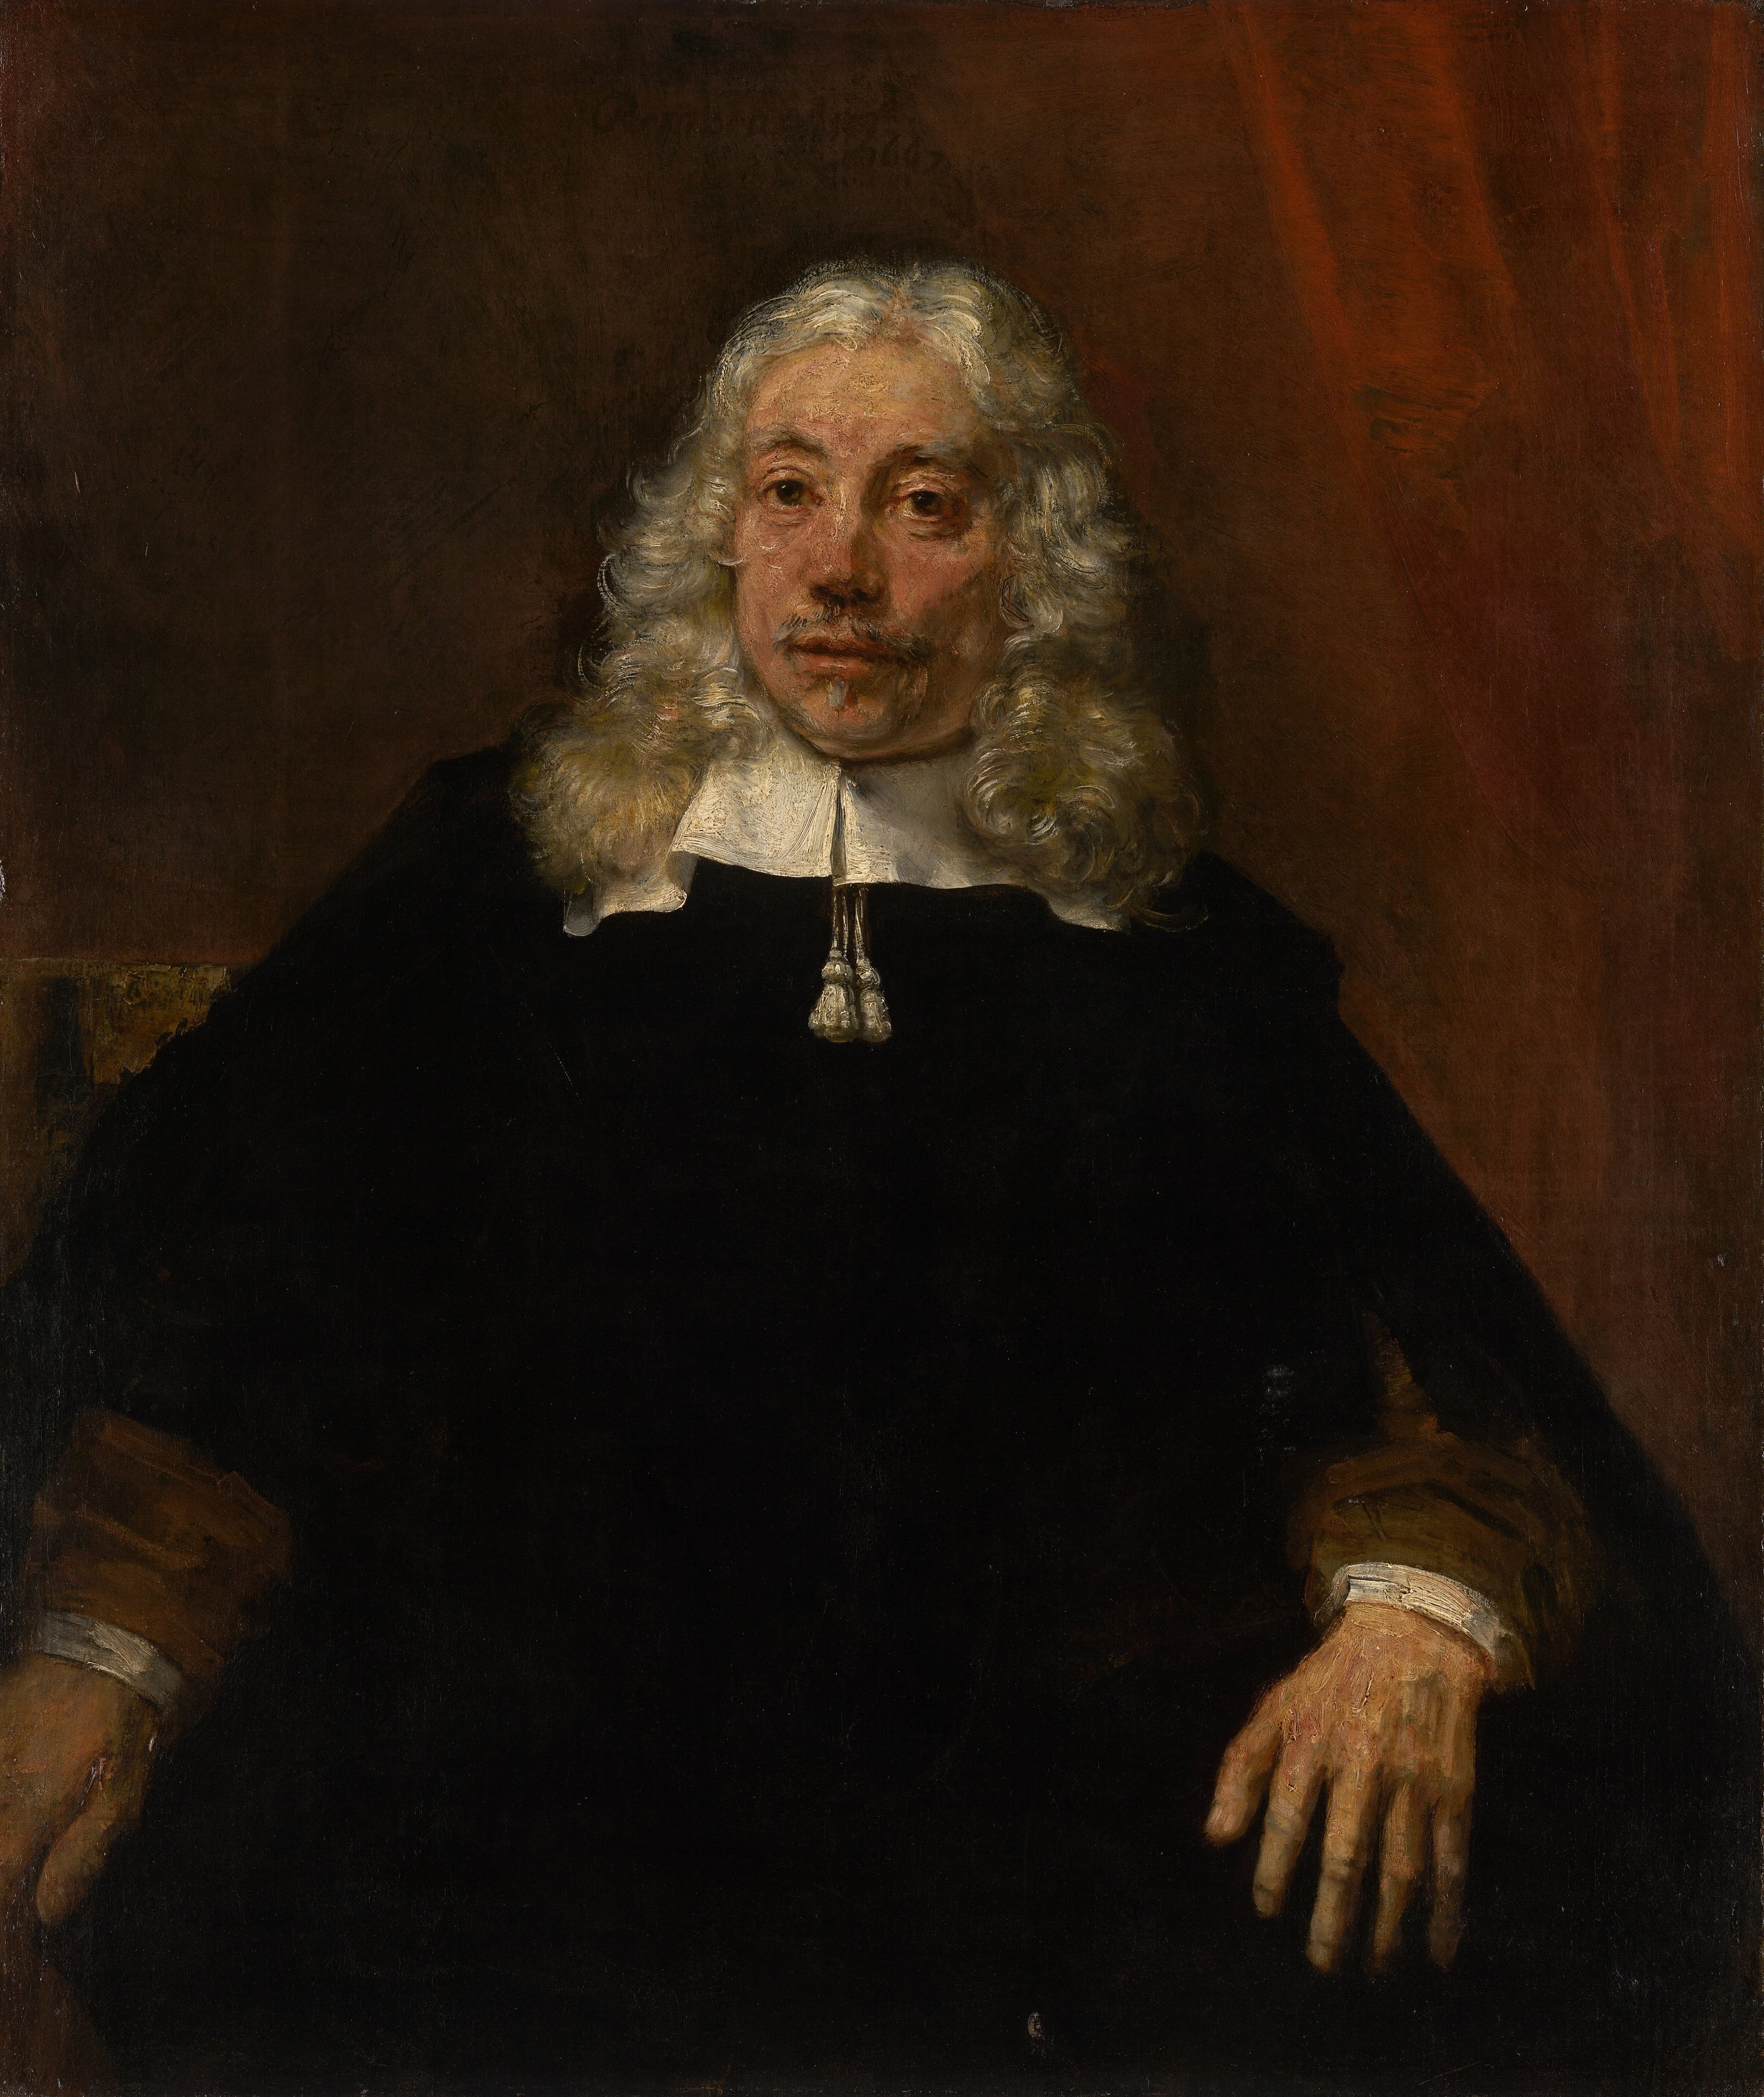 Portrait of a white-haired man